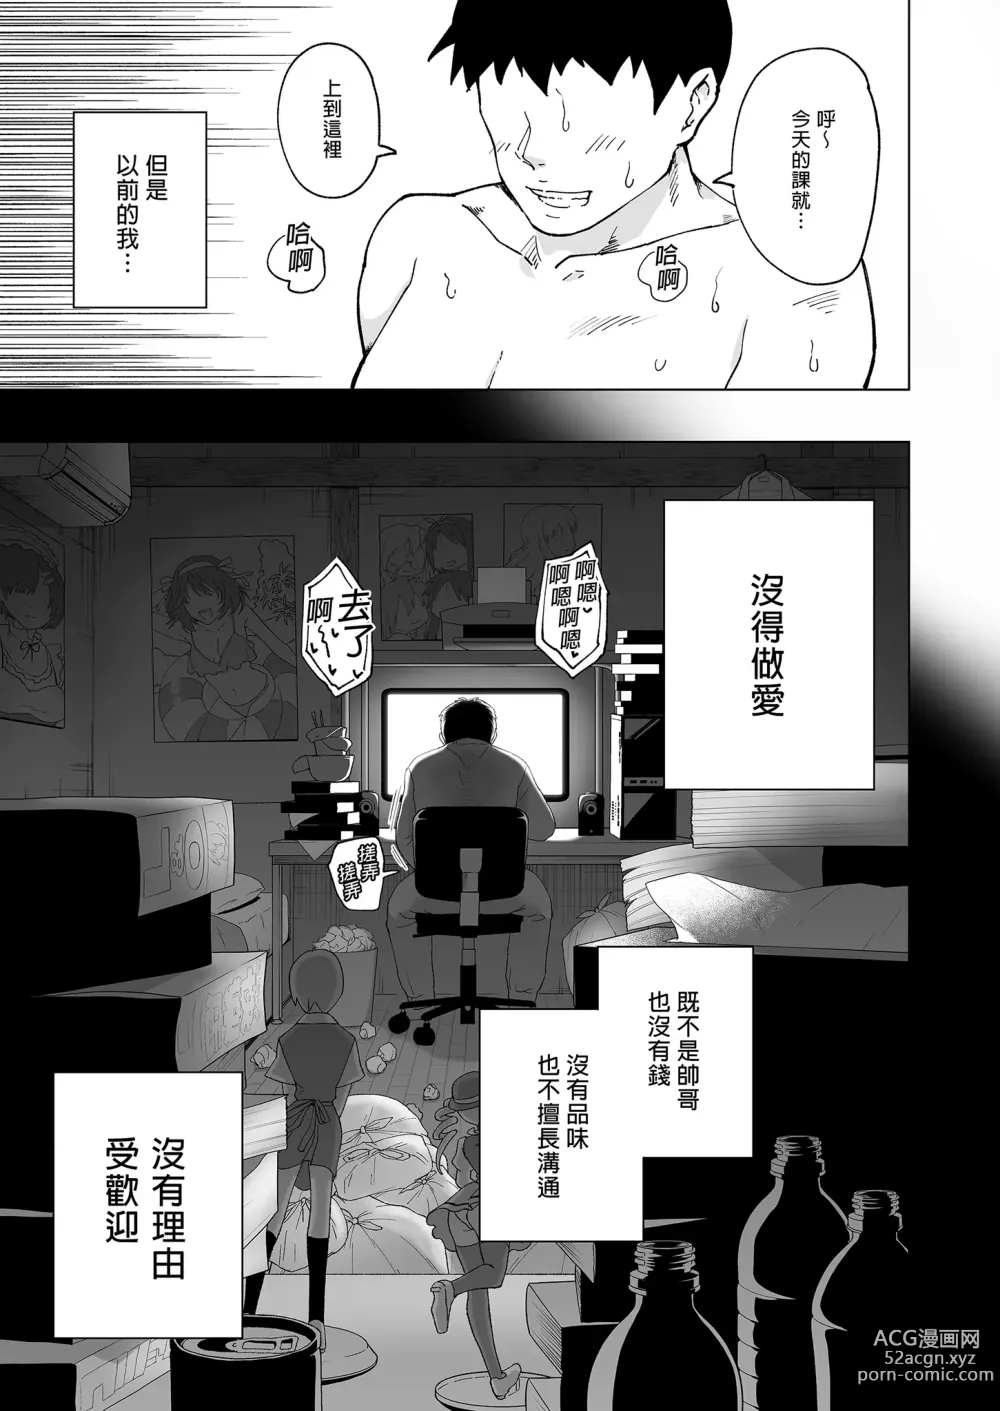 Page 315 of doujinshi _セックススマートフォン～ハーレム学園編総集編～